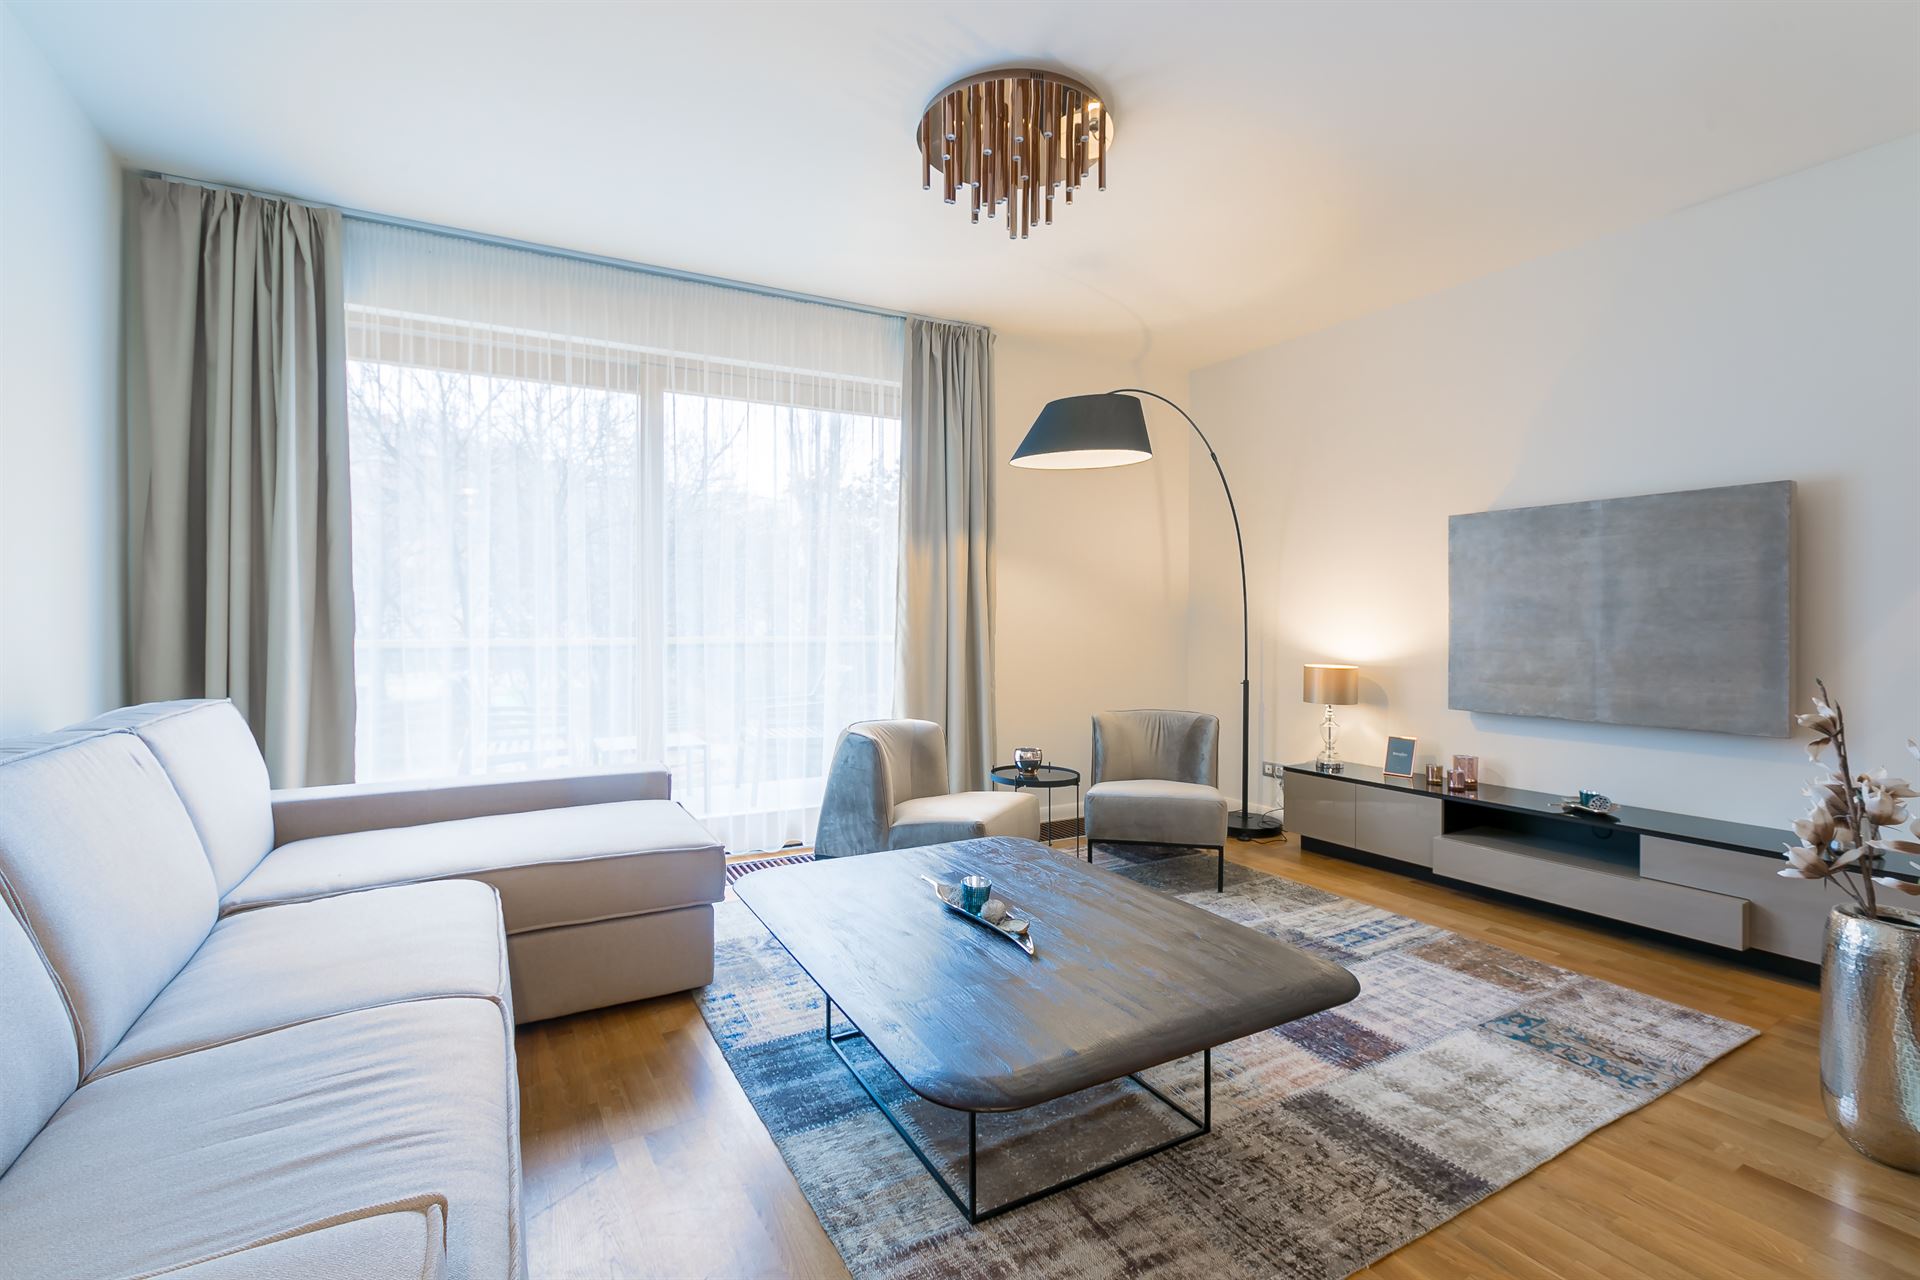 budapest-rental-long-term-lease-luxury-1-bedroom-apartment-with-view-flatrental-budapest-castle-district-12